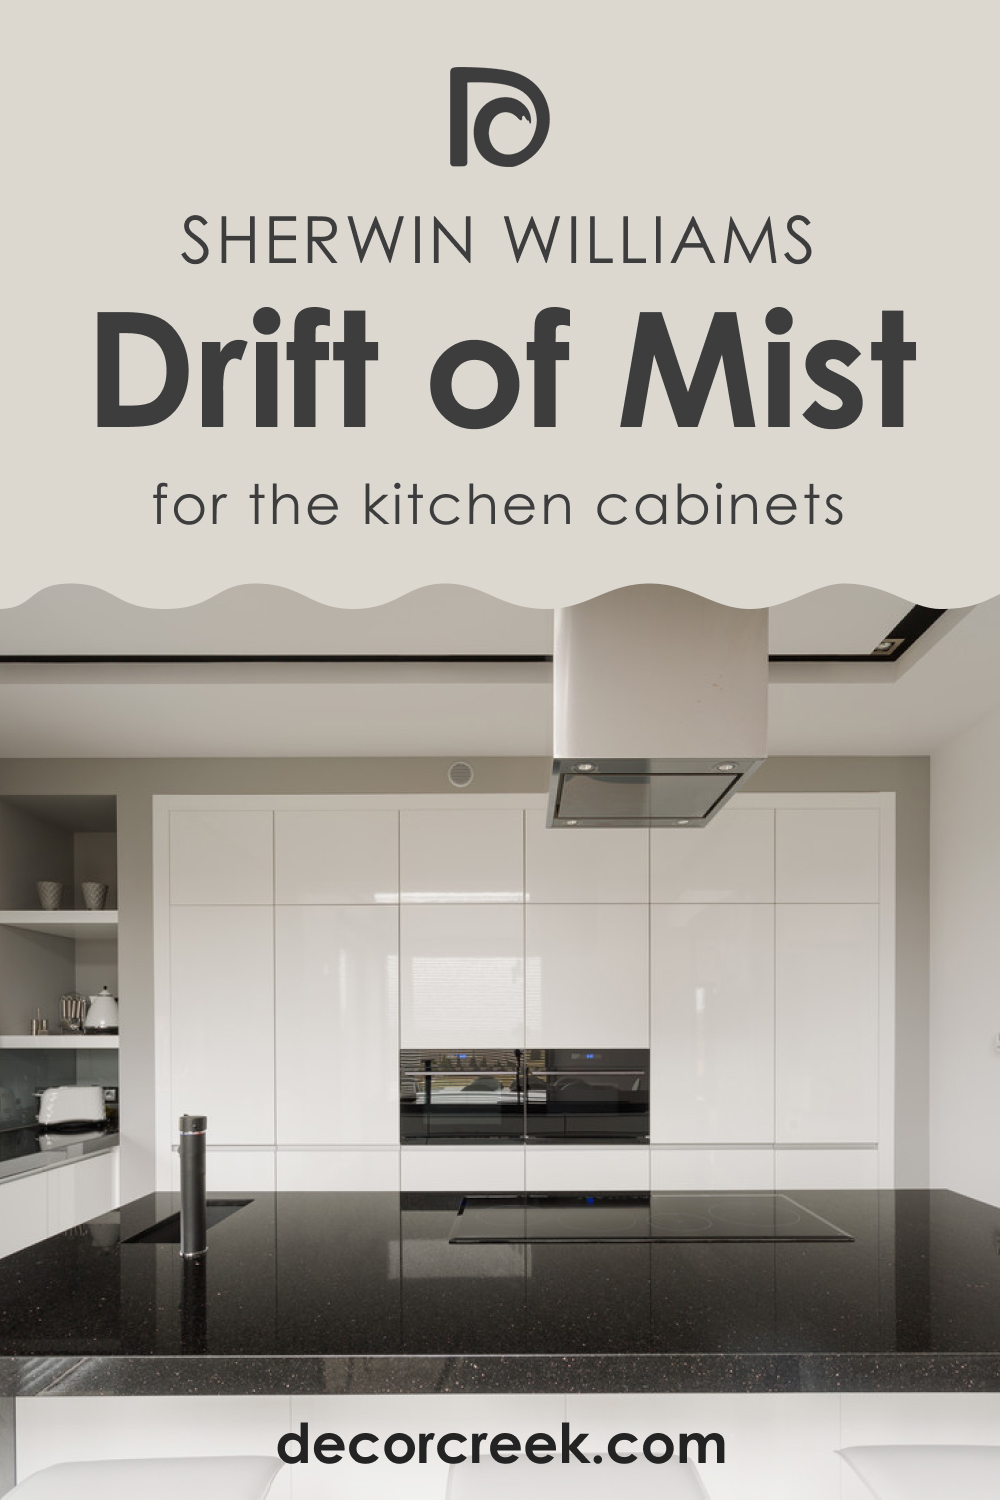 How to Use SW 9166 Drift of Mist for the Kitchen Cabinets?